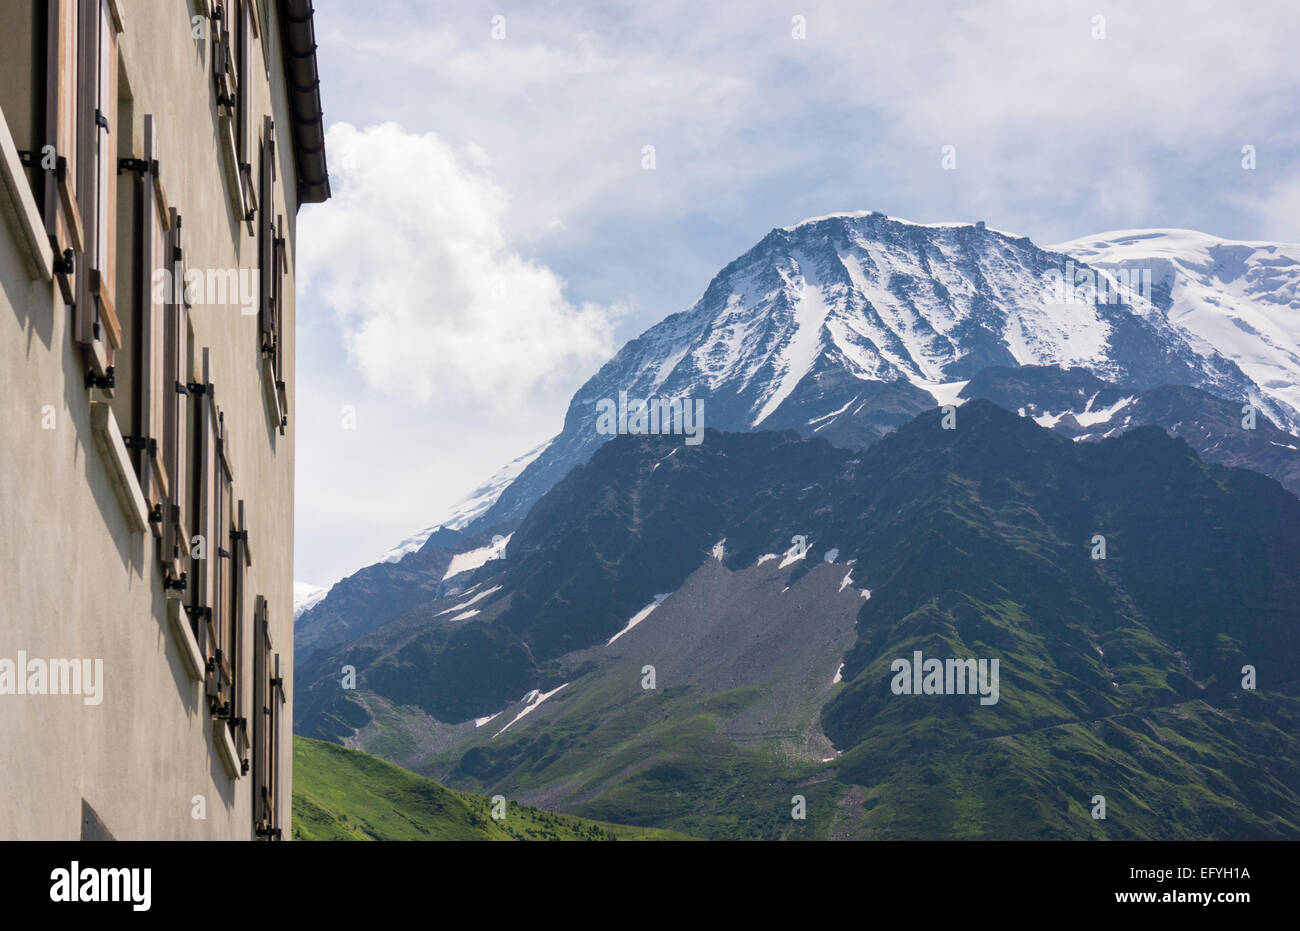 Aiguille du Gouter on Mont Blanc mountain peak and the Bellevue Hotel, above the Chamonix Valley, Haute-Savoie, France, Europe Stock Photo